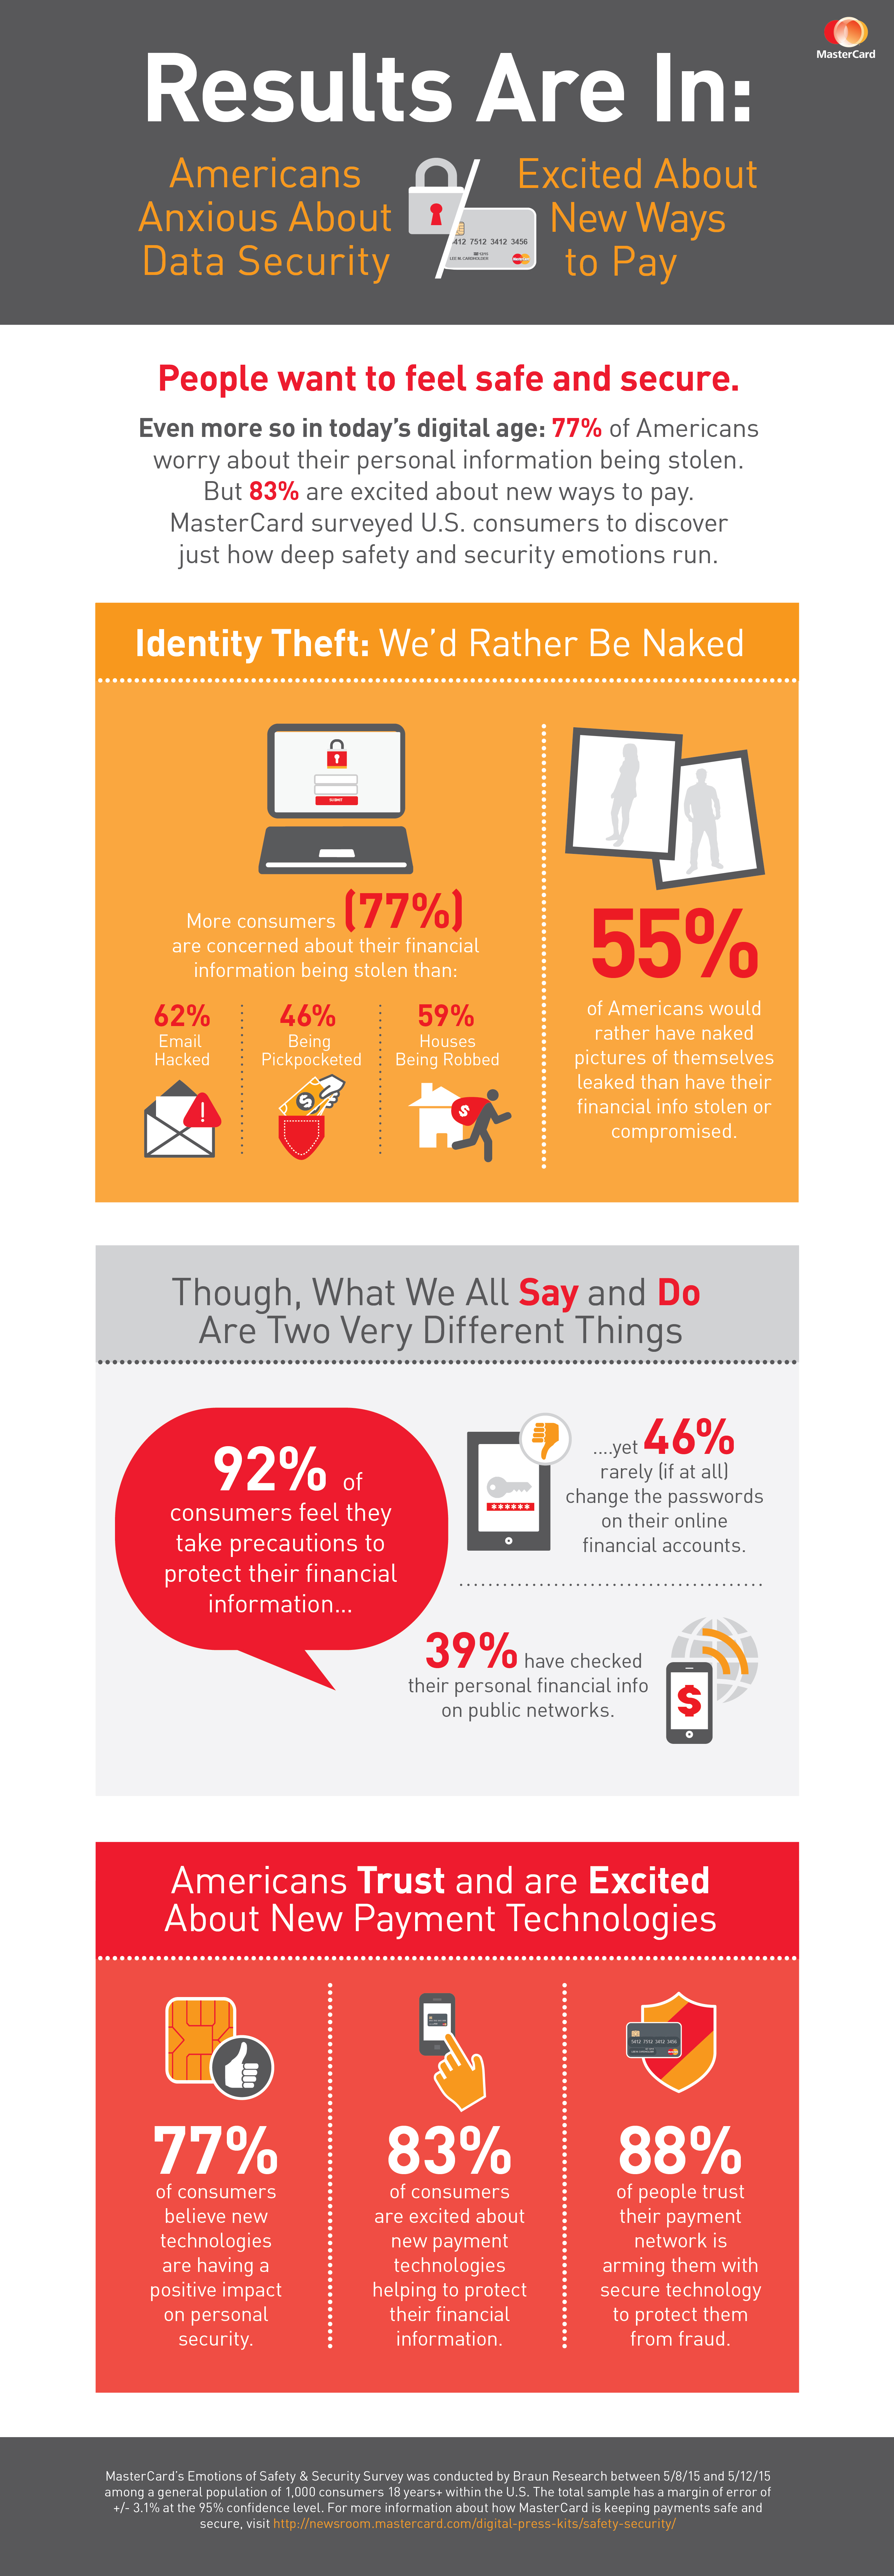 Infographic MasterCard Survey Reveals Americans Trust and are Excited about New Payment Tech